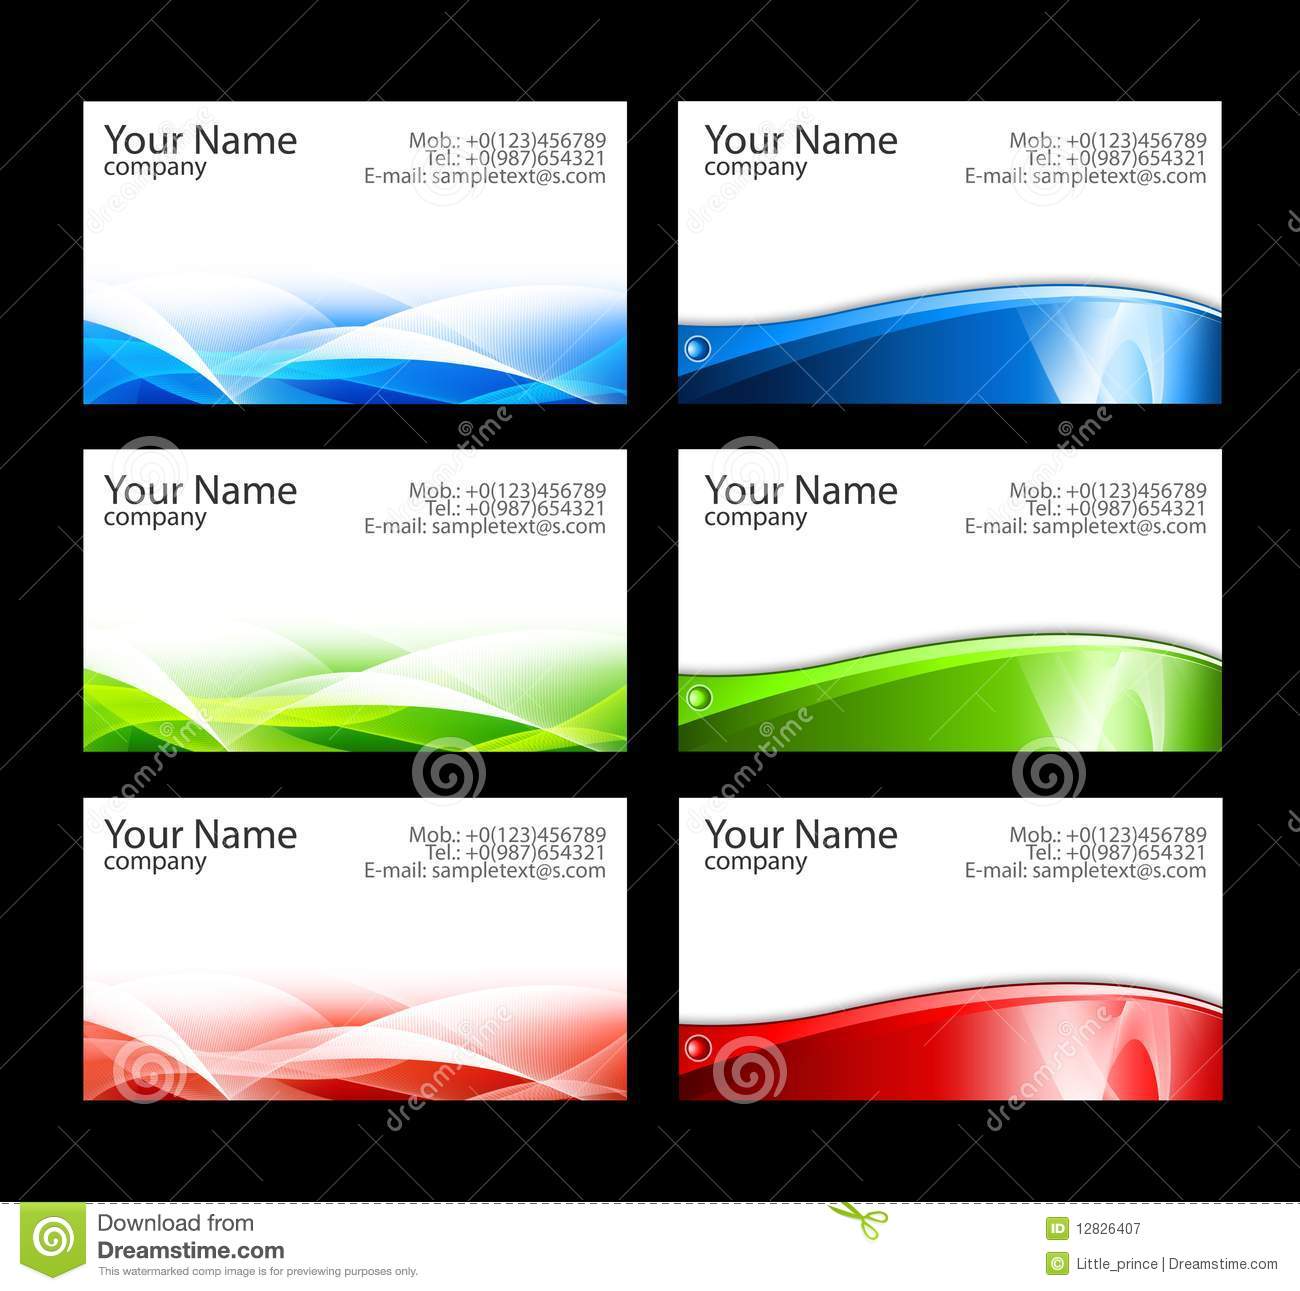 word business card templates free download